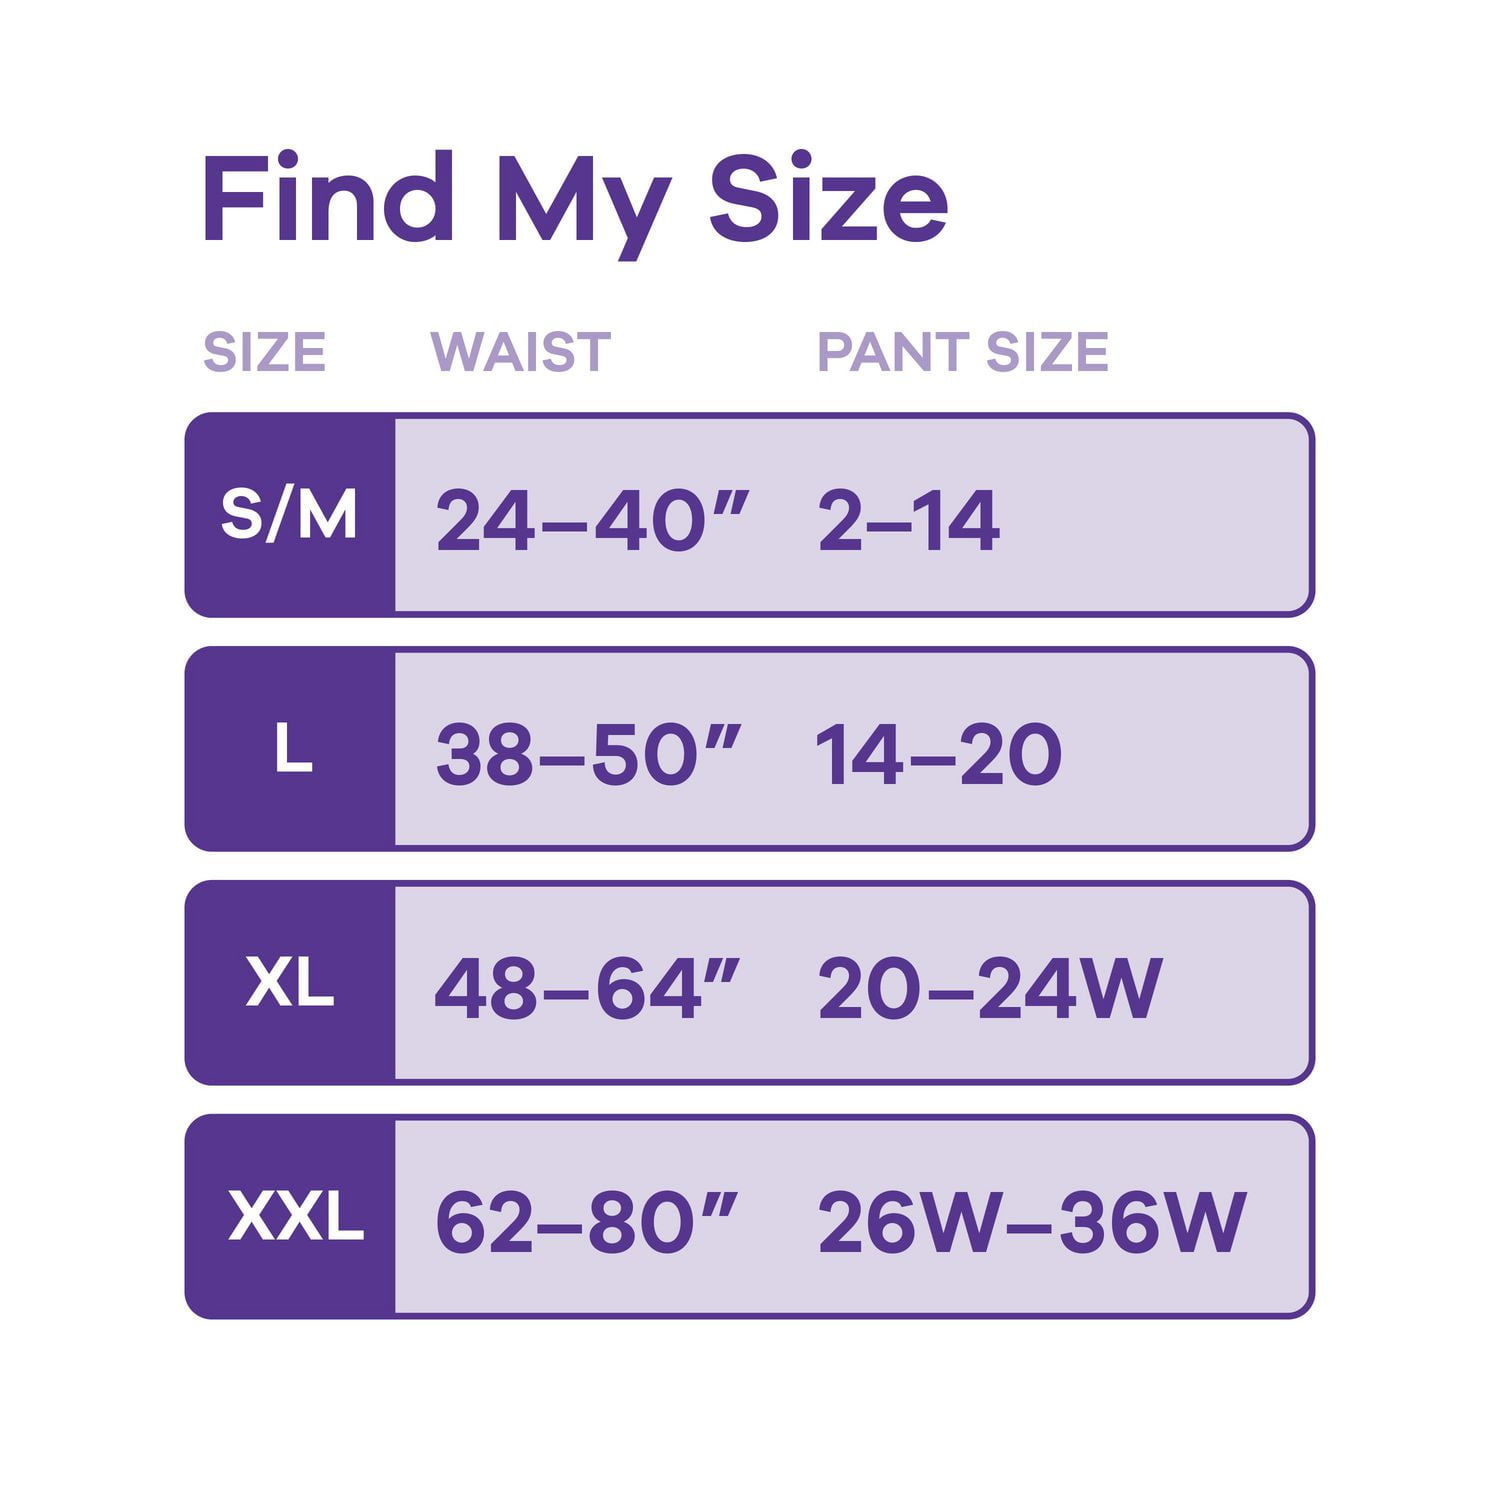 Just My Size: Spring into $15 off $75: Panties up to size 14